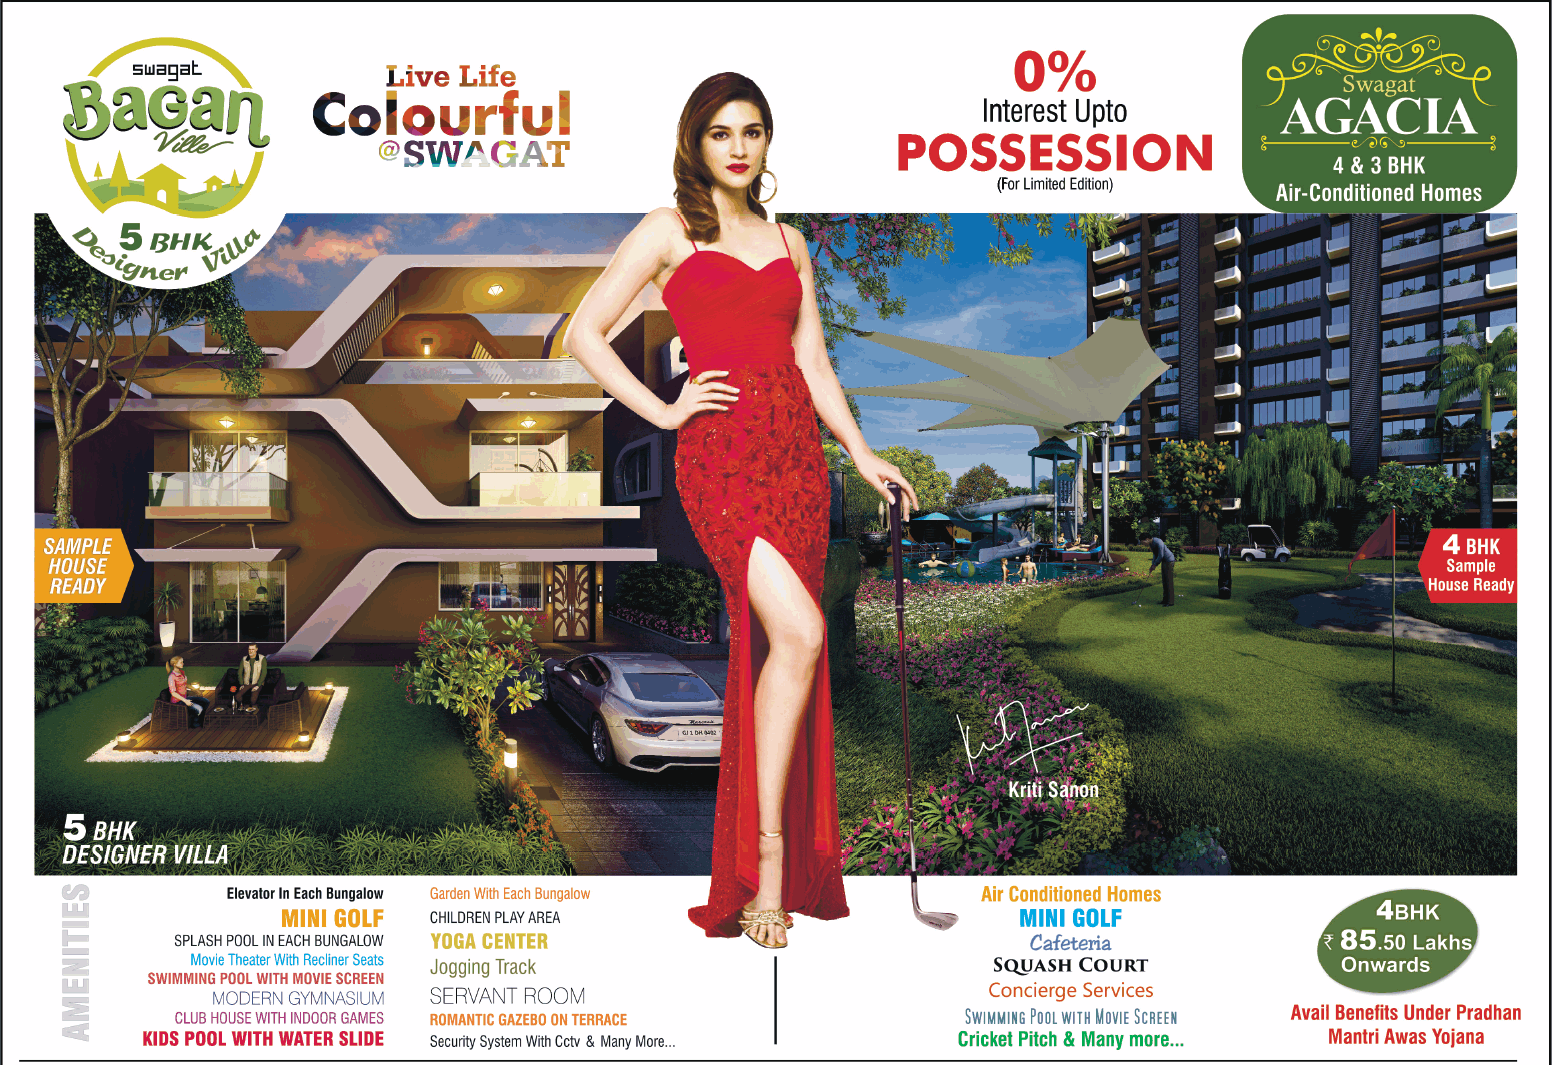 Pay 0% interest upto possession at Swagat Agacia & Swagat Bagan Ville in Ahmedabad Update